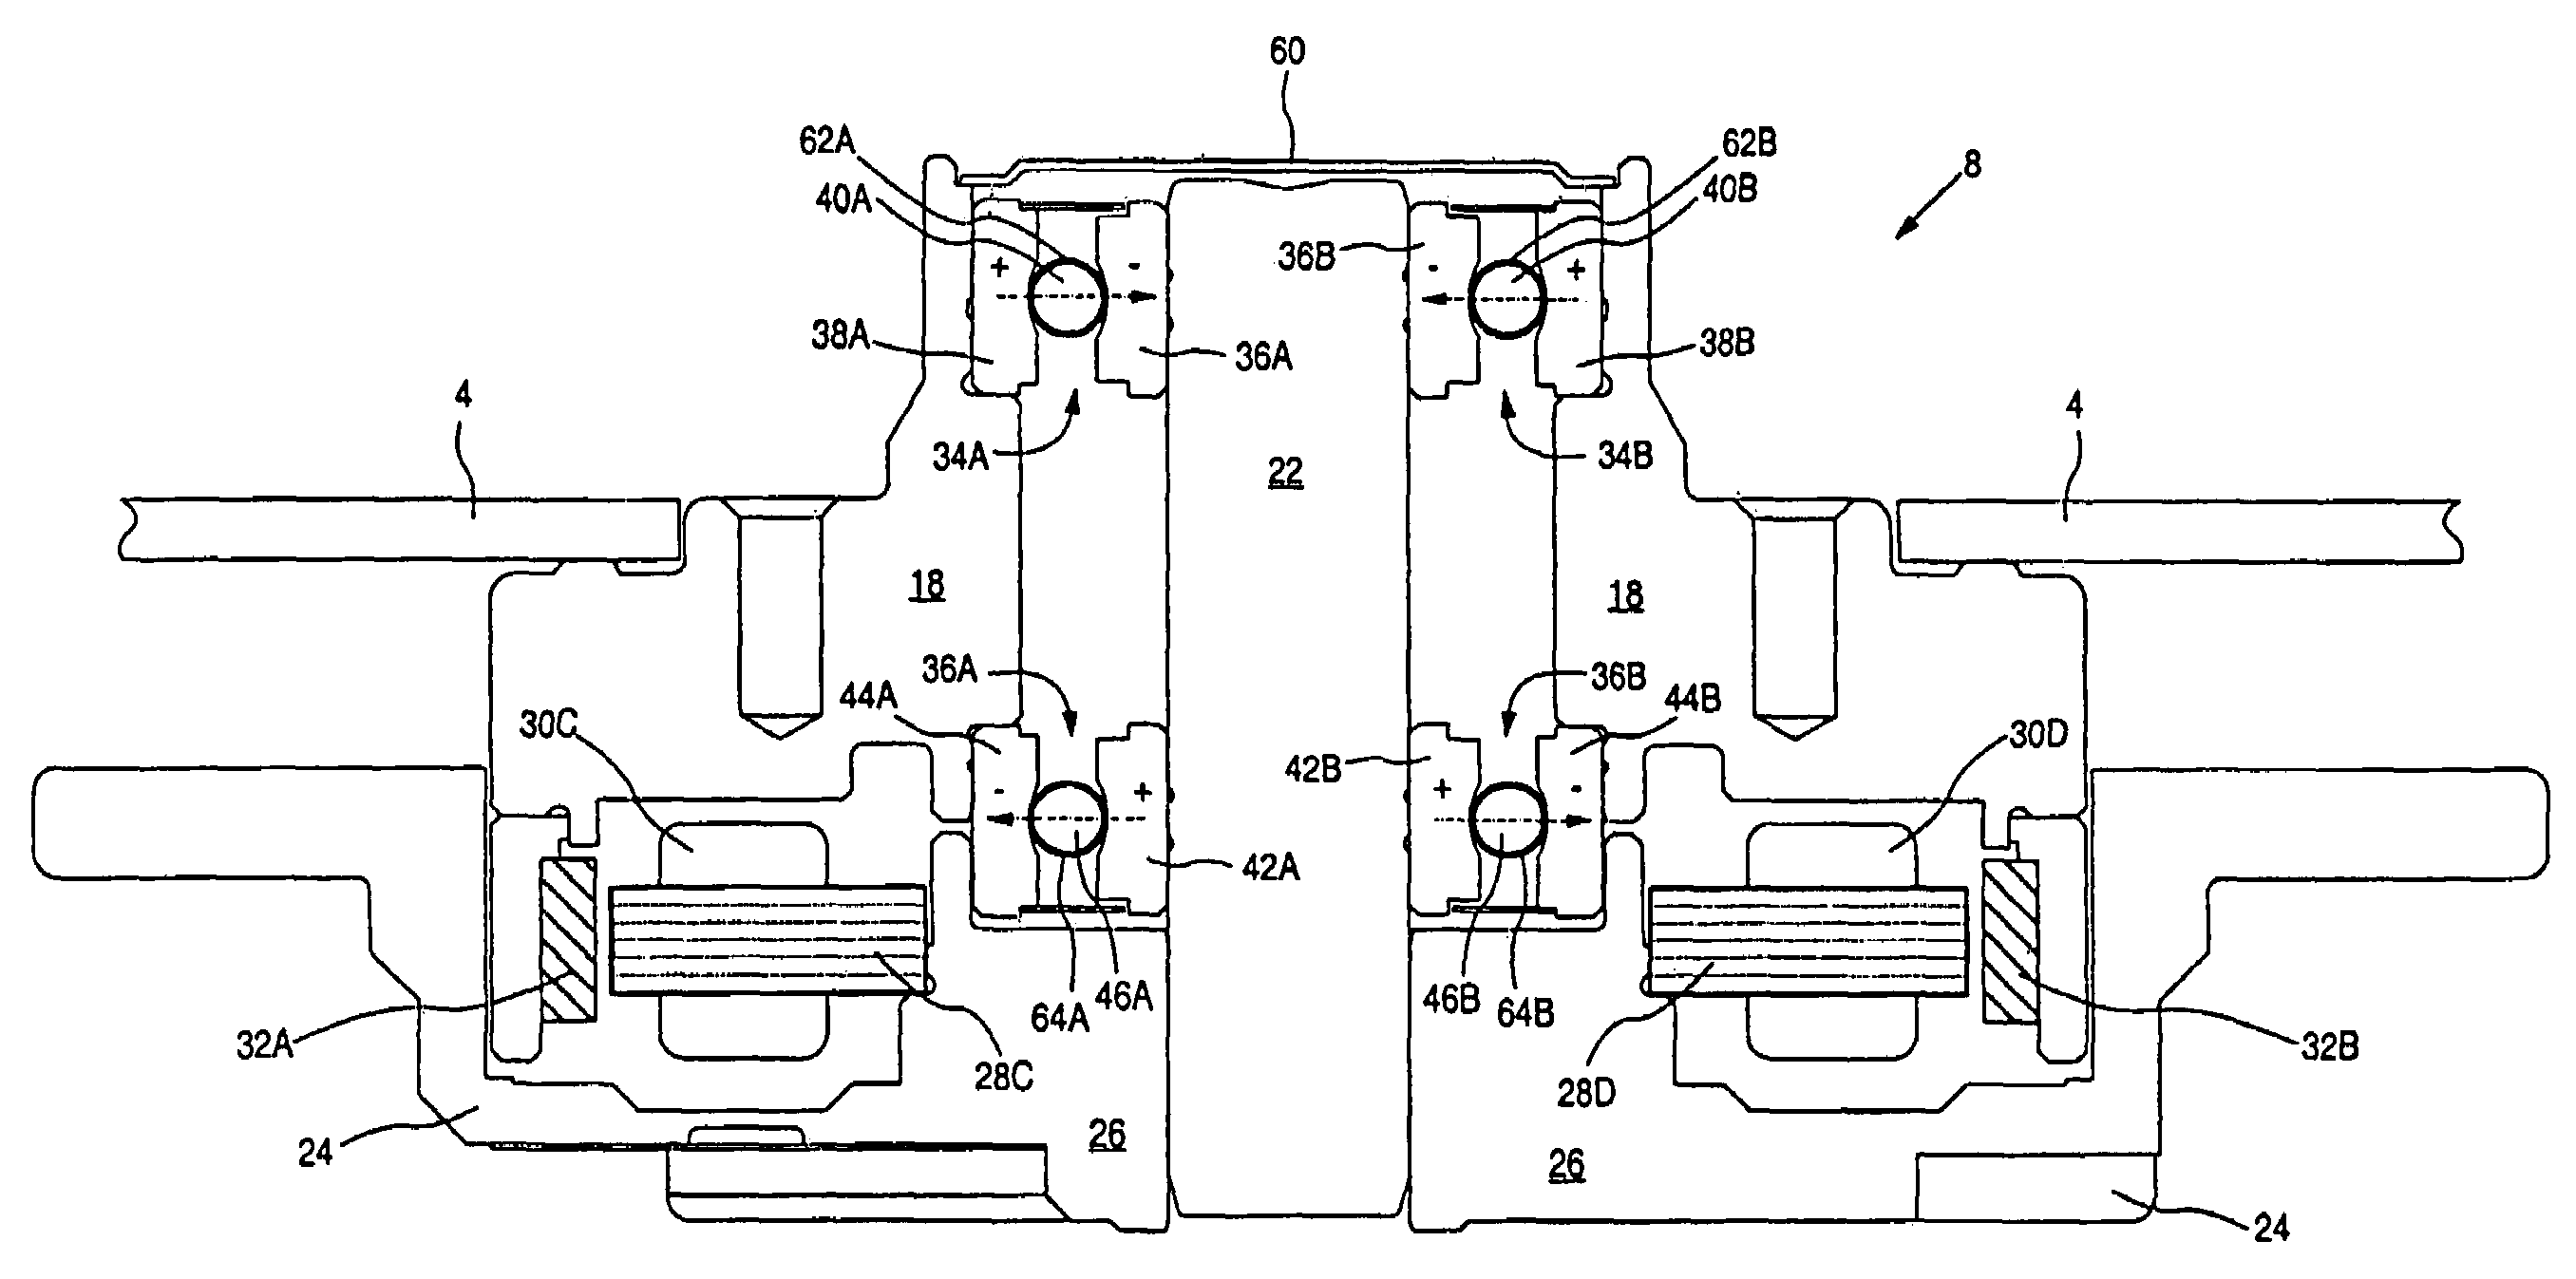 Disk drive comprising a spindle motor employing anionic/cationic lubricant to reduce disk surface potential